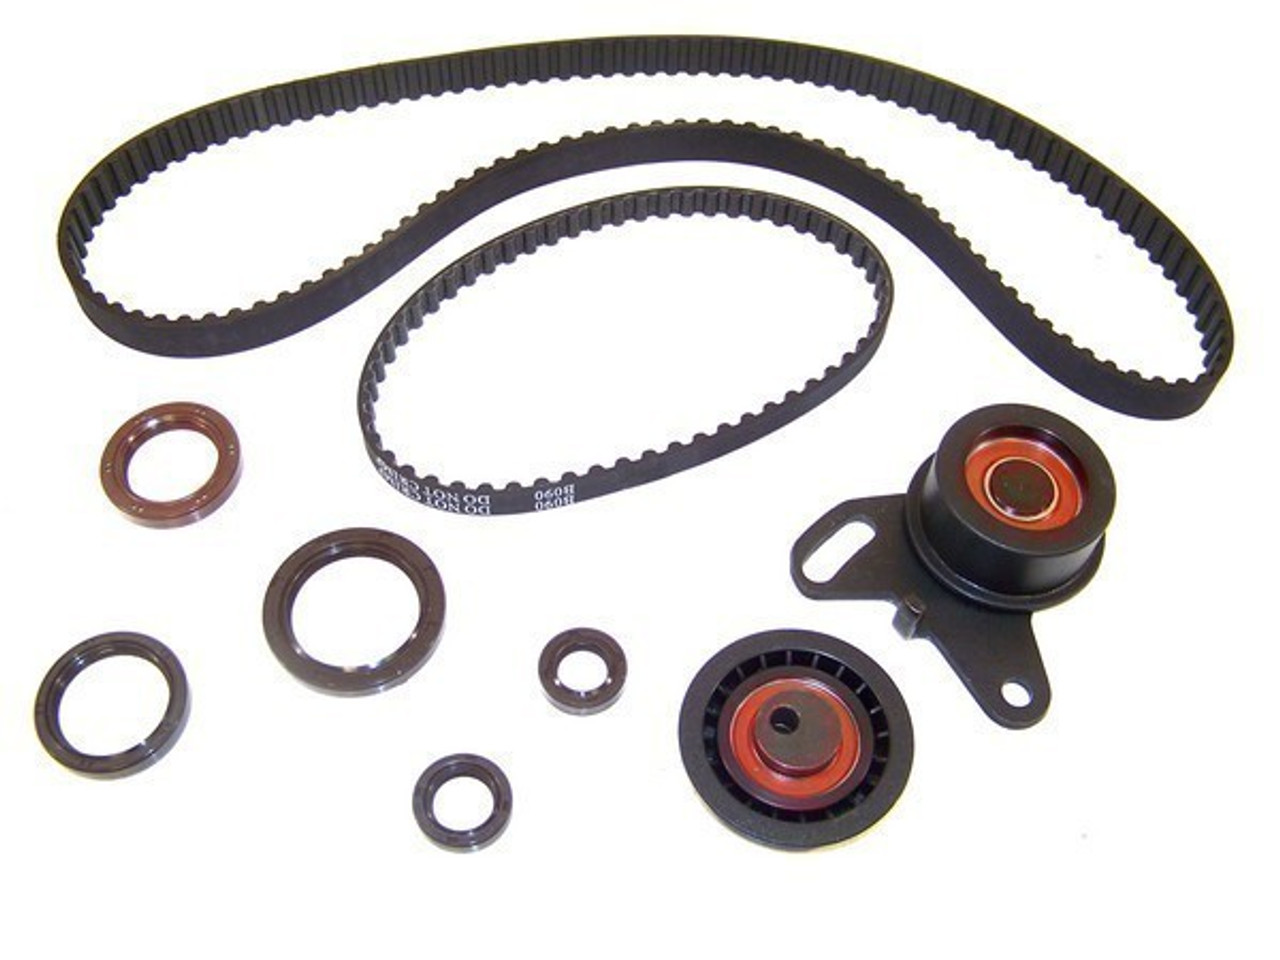 1987 Plymouth Colt 2.0L Engine Timing Belt Component Kit TBK105 -50